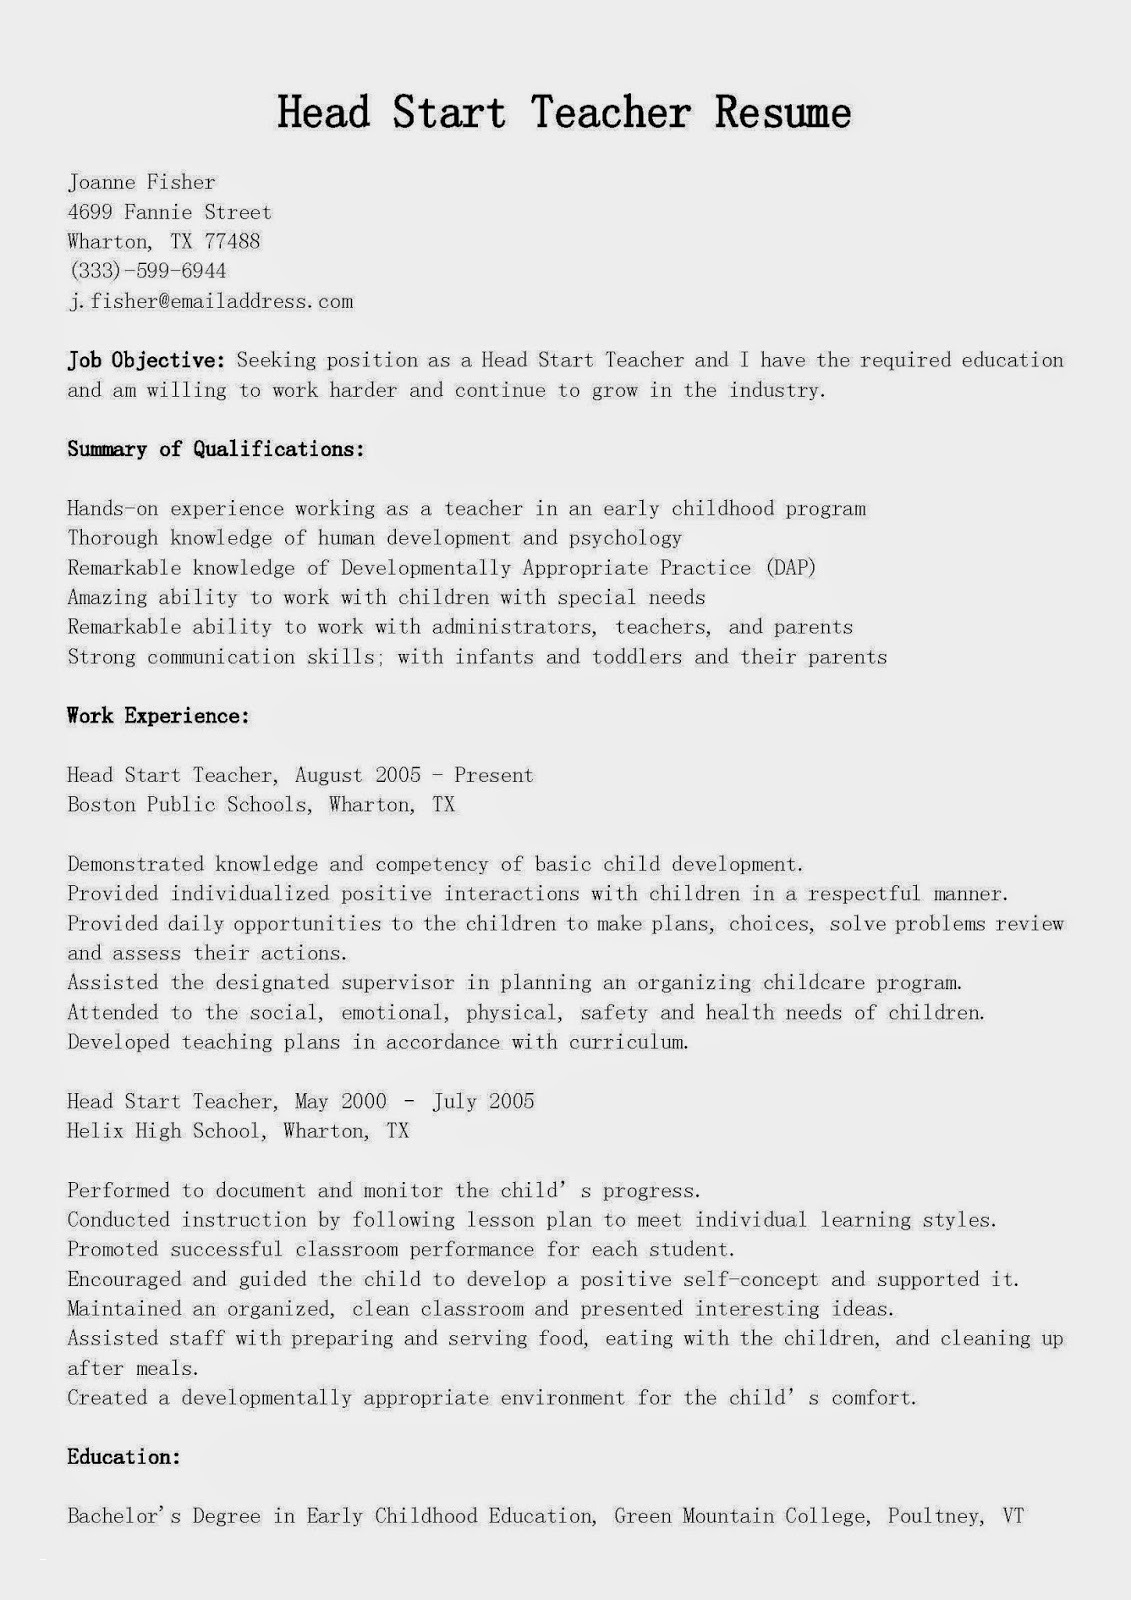 Cover Letter Template for High School Students - Resume Example for Students Best Example A Cover Letter for